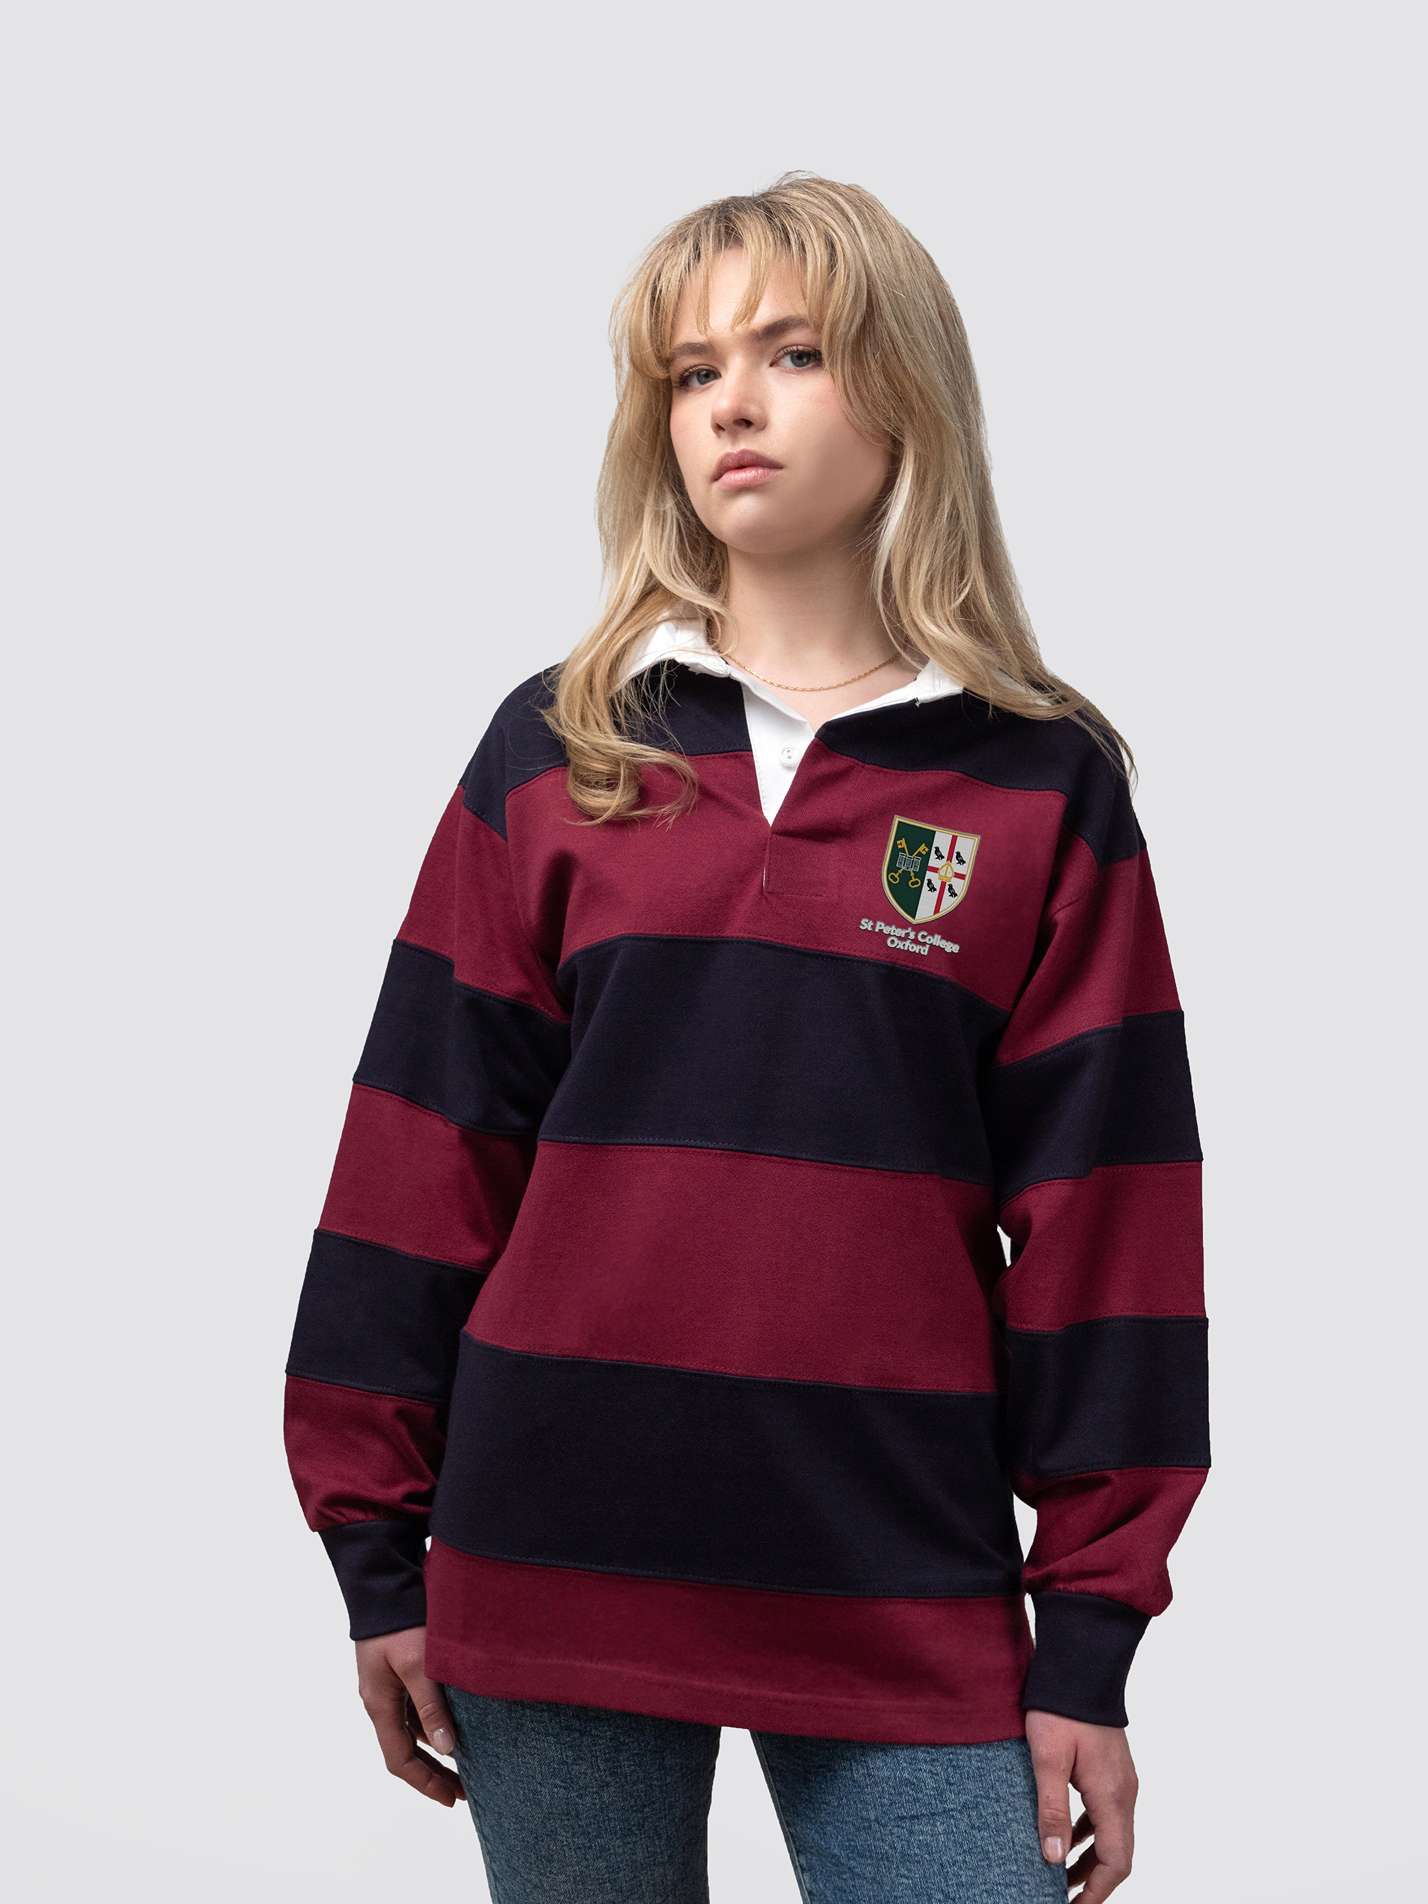 St Peter's College rugby shirt, with burgundy and navy stripes